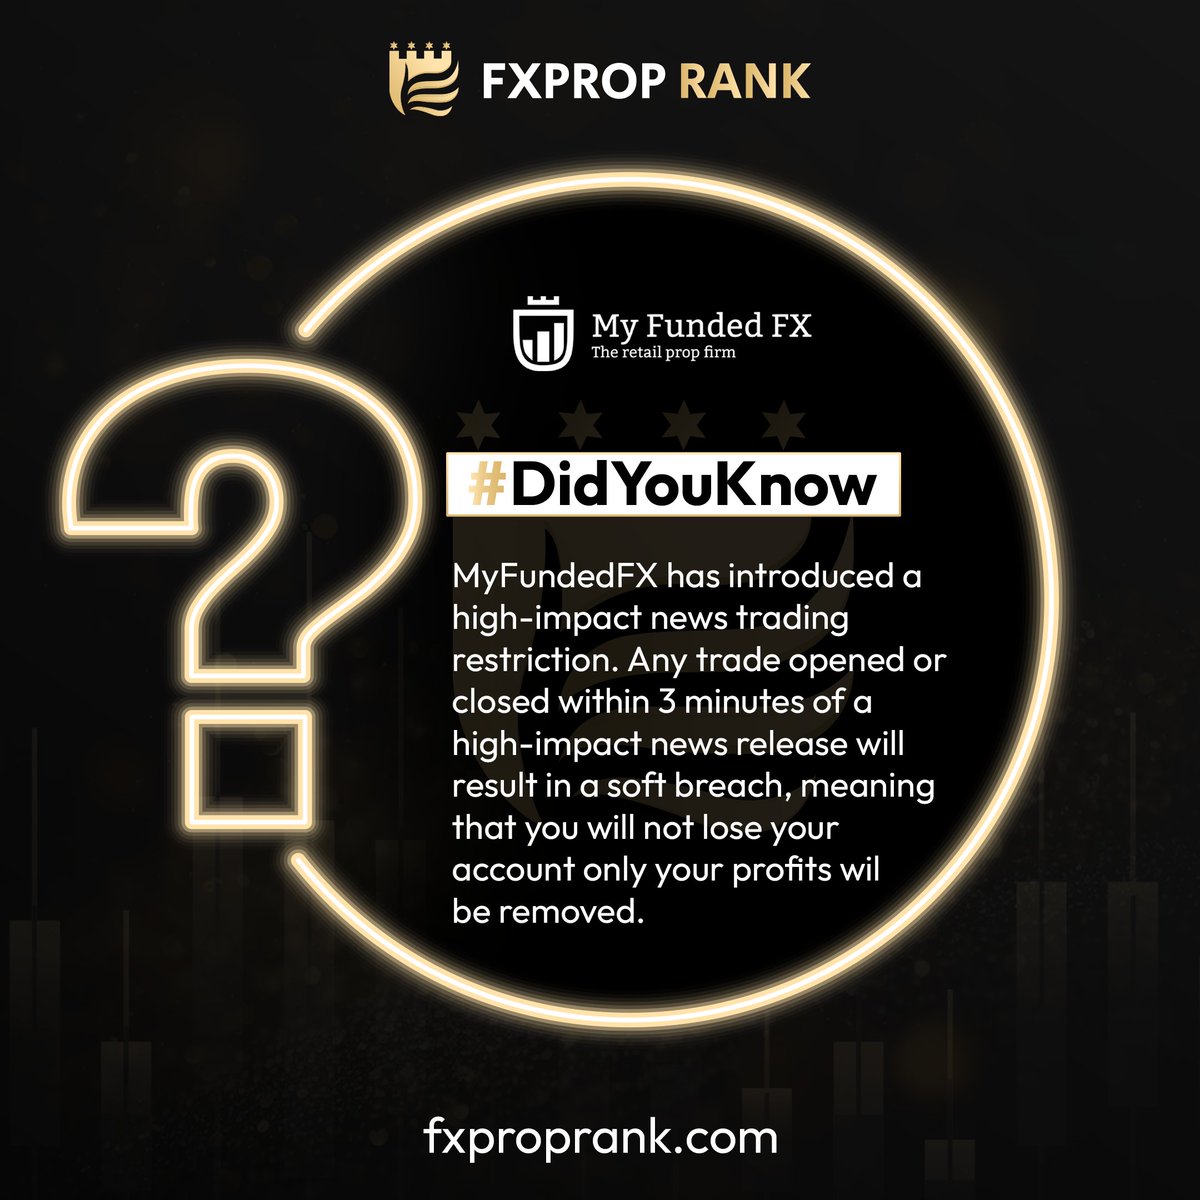 Did you know? 😃
MyFundedFX has introduced a high-impact news trading restriction. Any trade opened or closed within 3 minutes of a high-impact news release will result in a soft breach.
#PropFirms #HighImpact #MyFundedFX #DidYouKnow #Forex